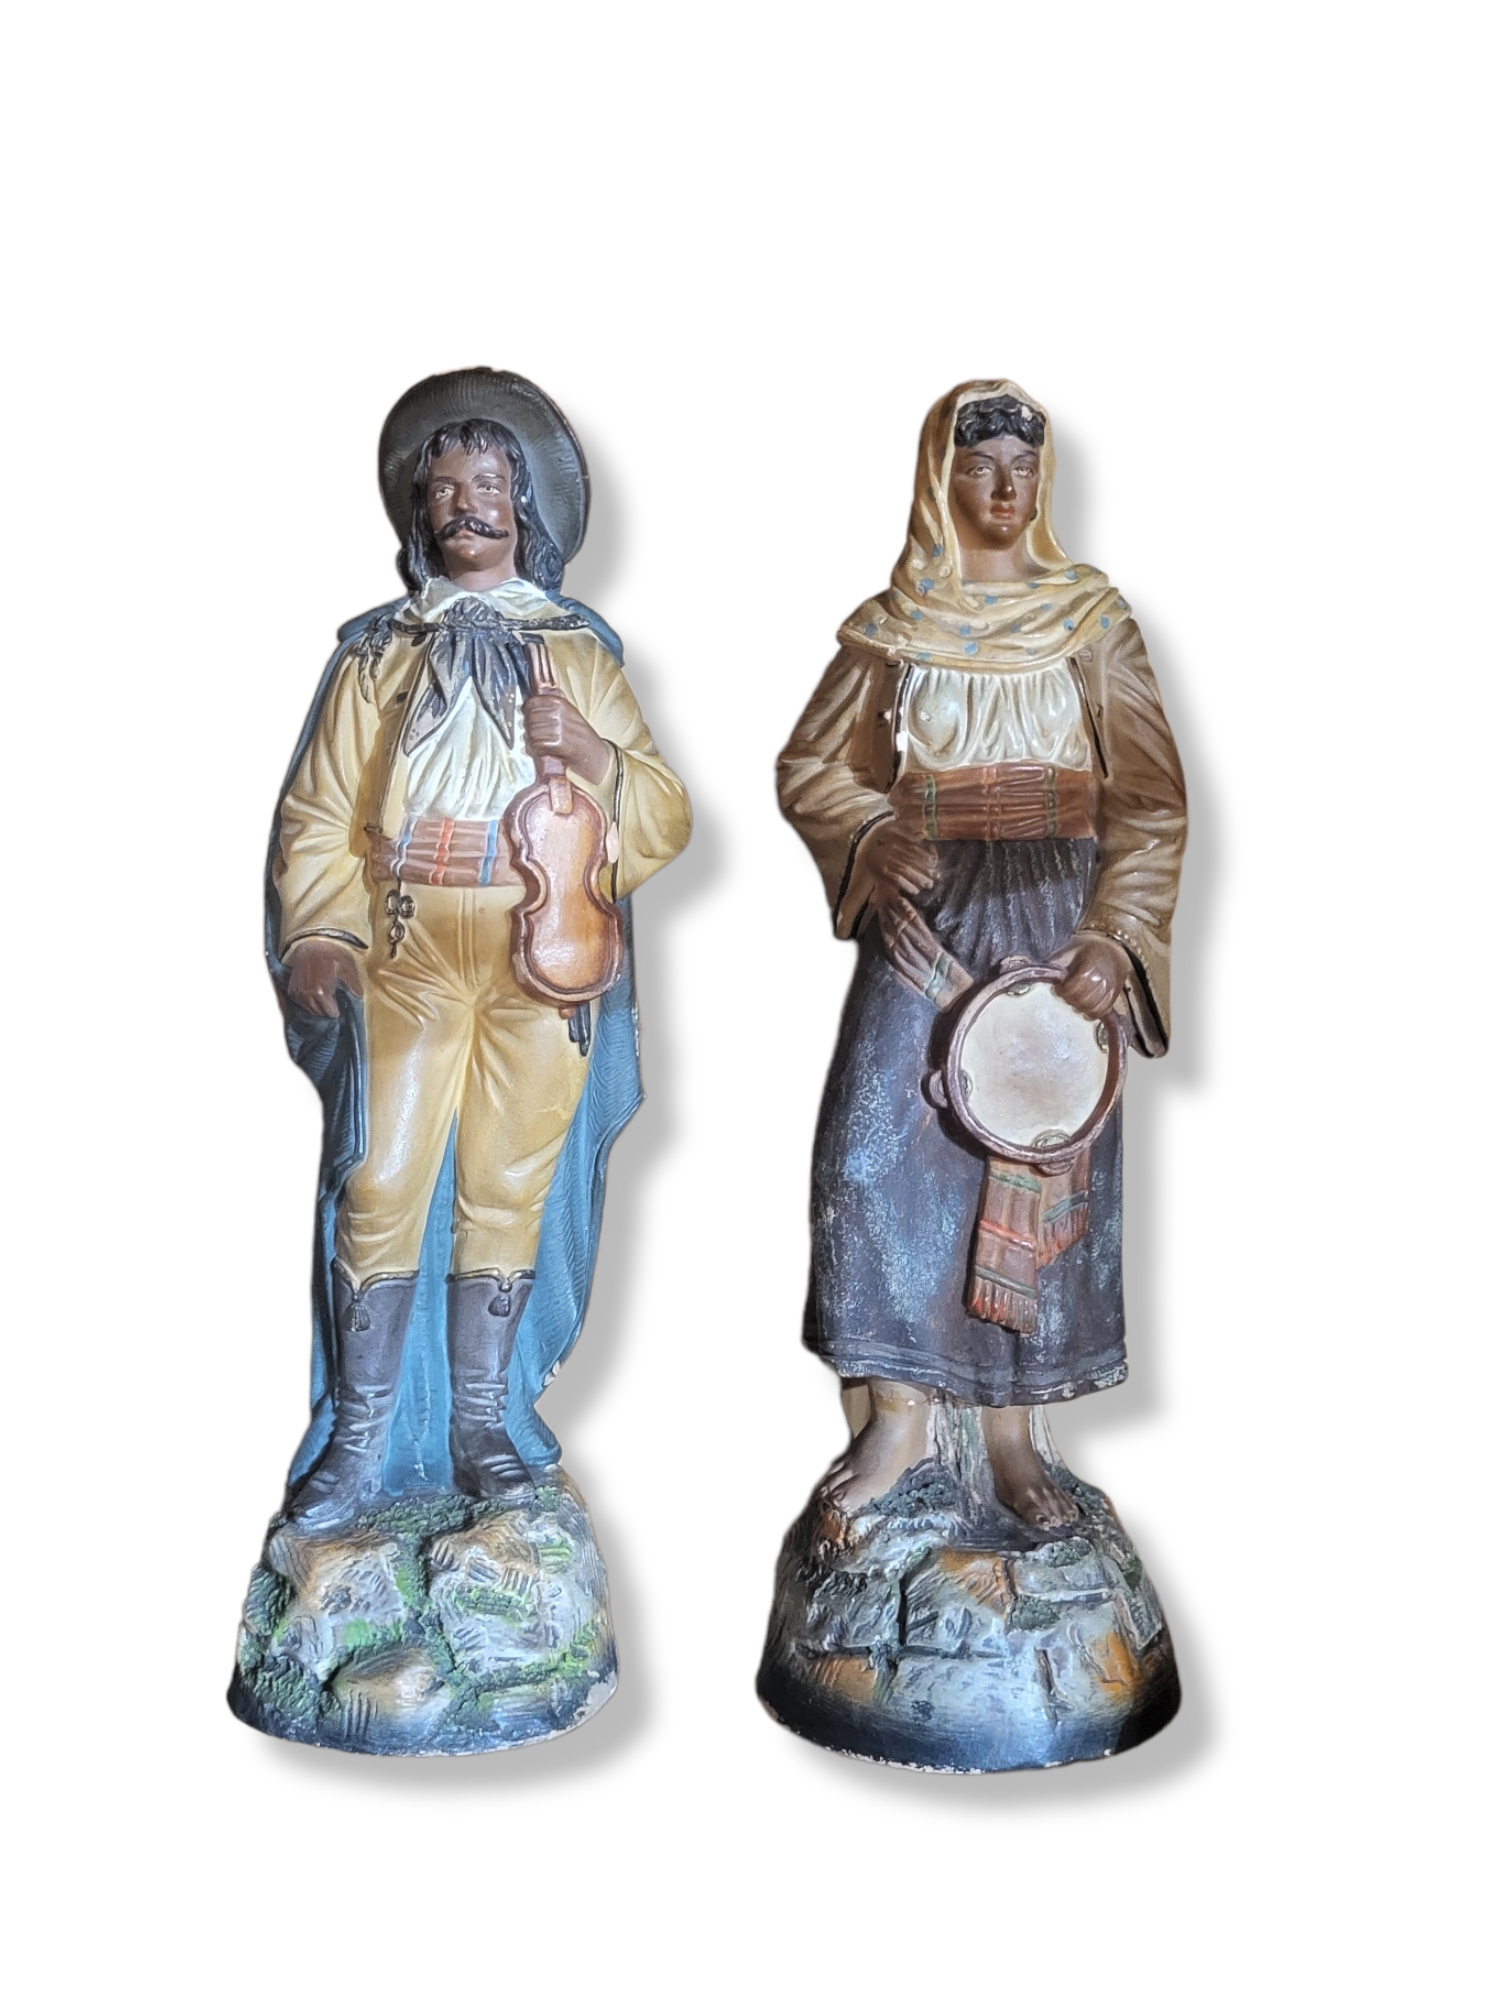 A PAIR OF 19TH CENTURY CONTINENTAL TERRACOTTA FIGURES MODELLED AS GYPSY MUSICIANS In period